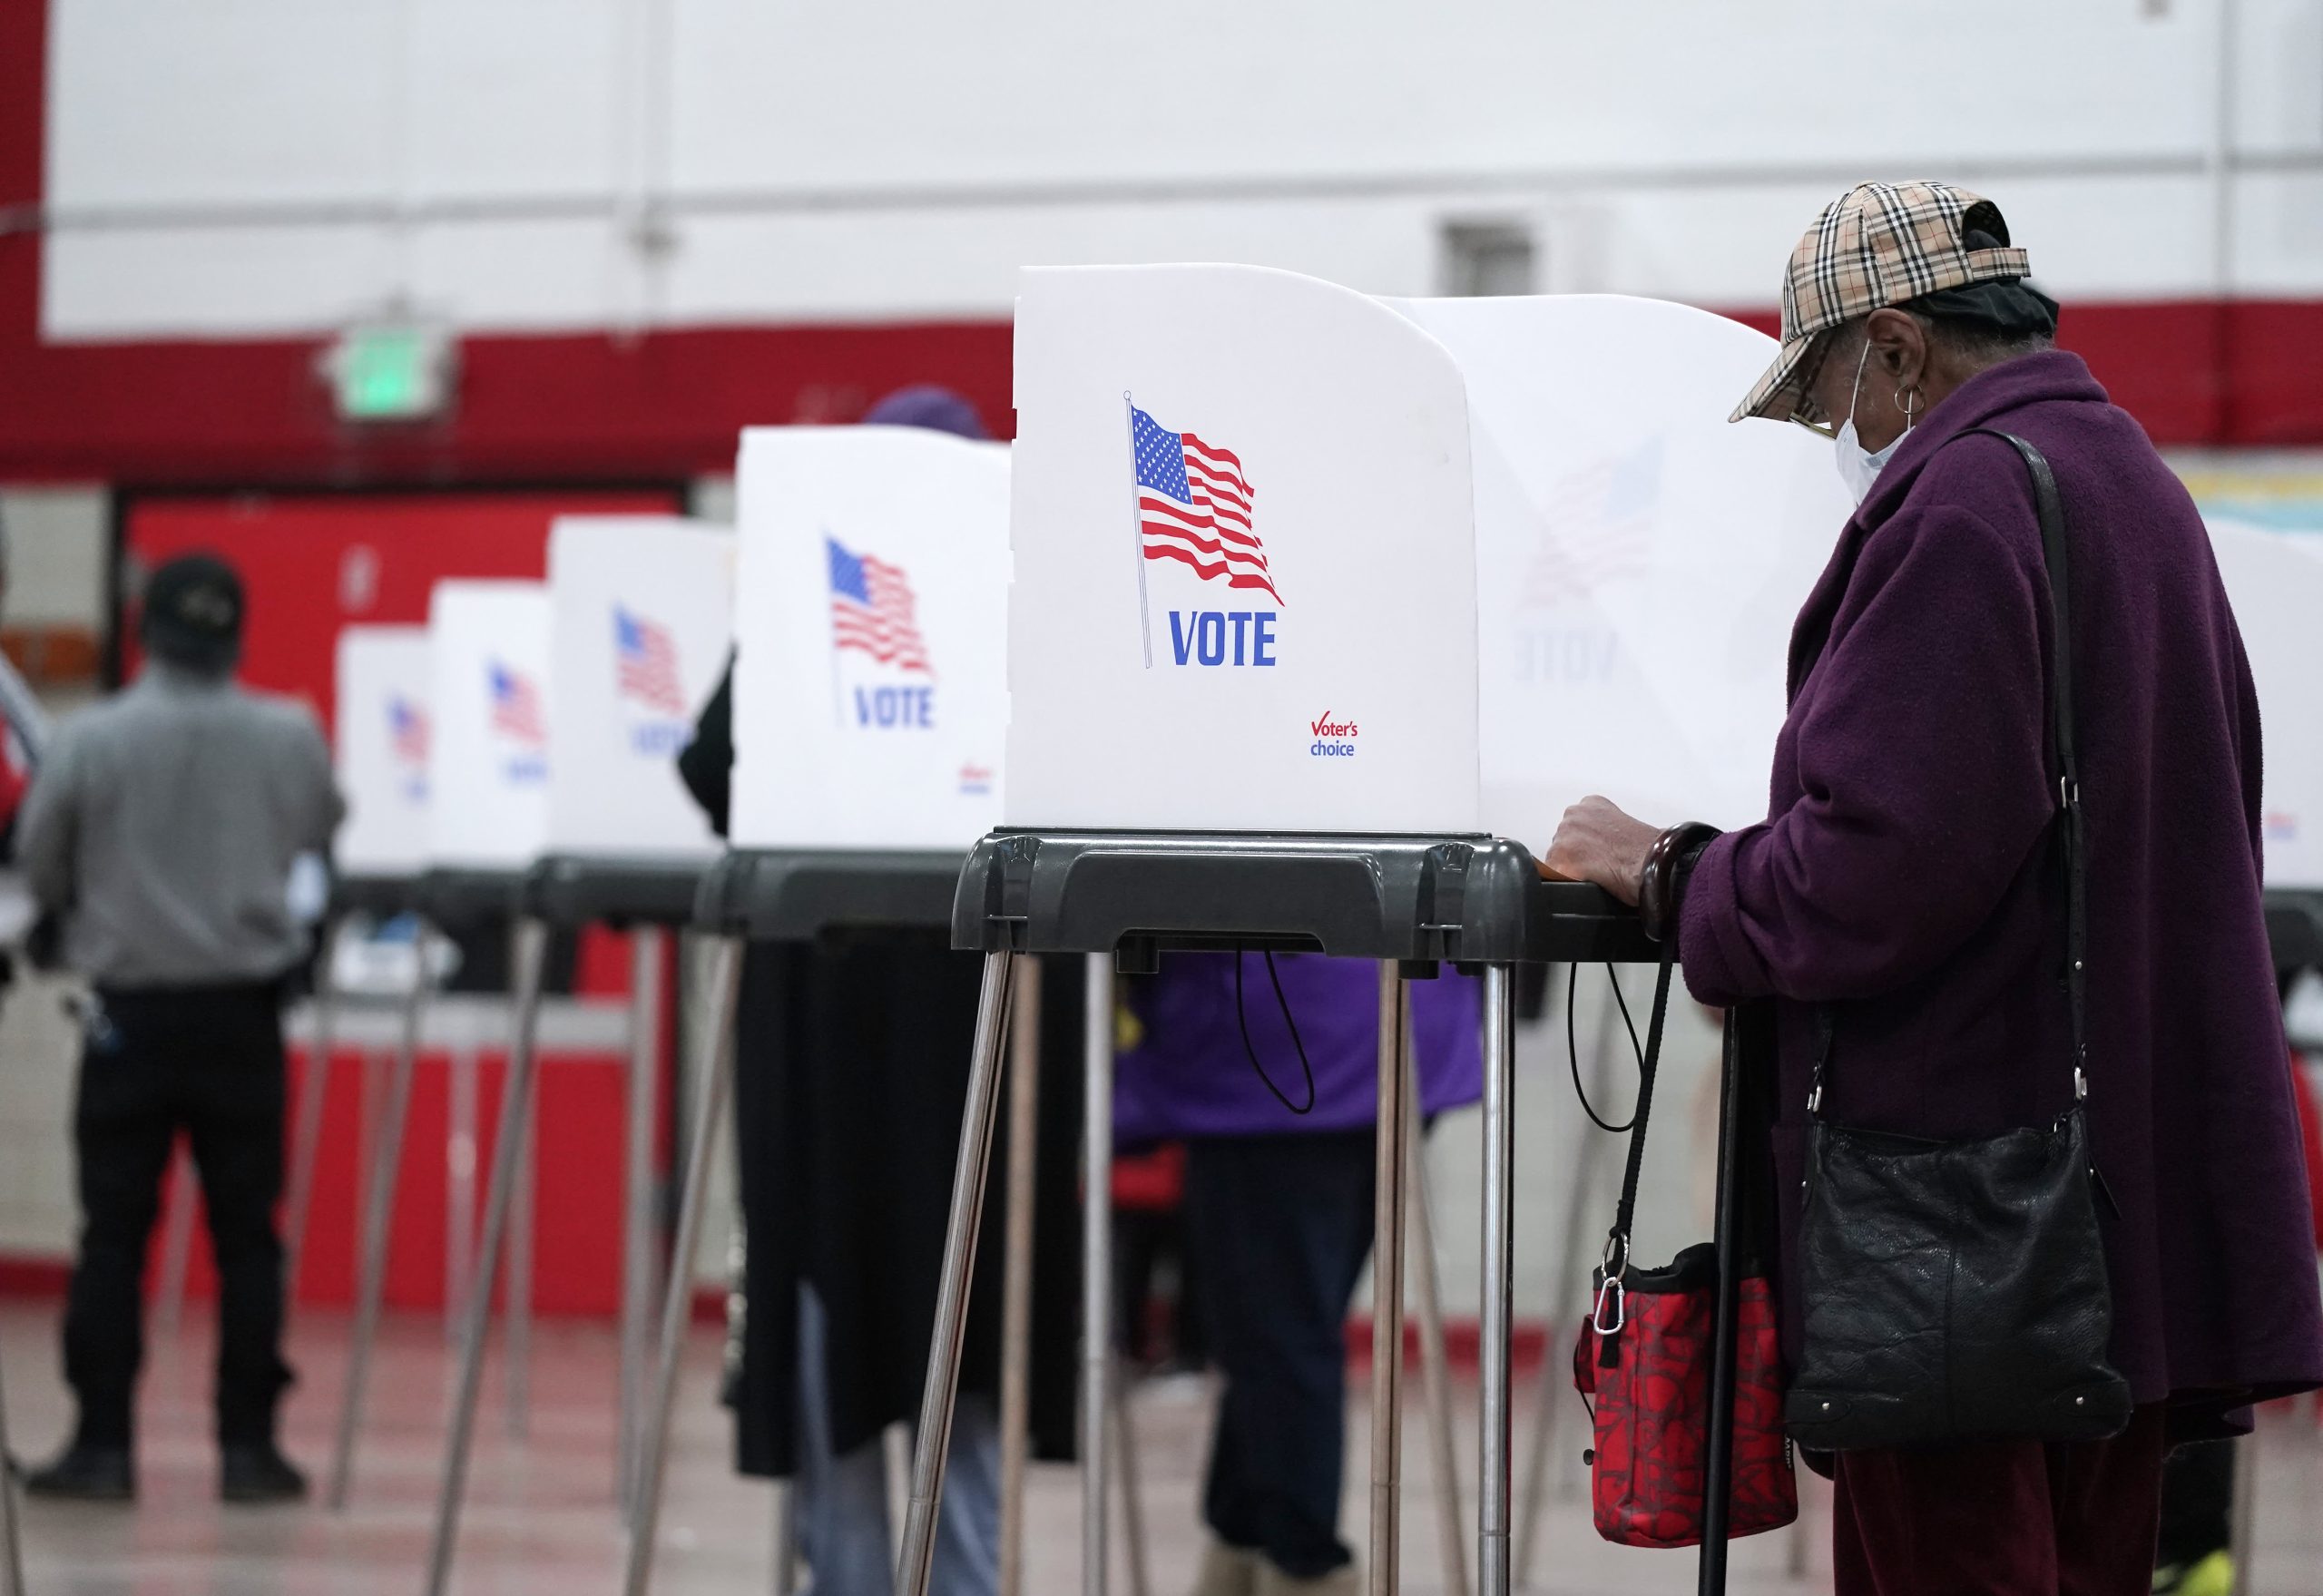 Federal Judge Maintains Open Access to Colorado Primaries for Unaffiliated Voters, Rejecting State GOP's Challenge